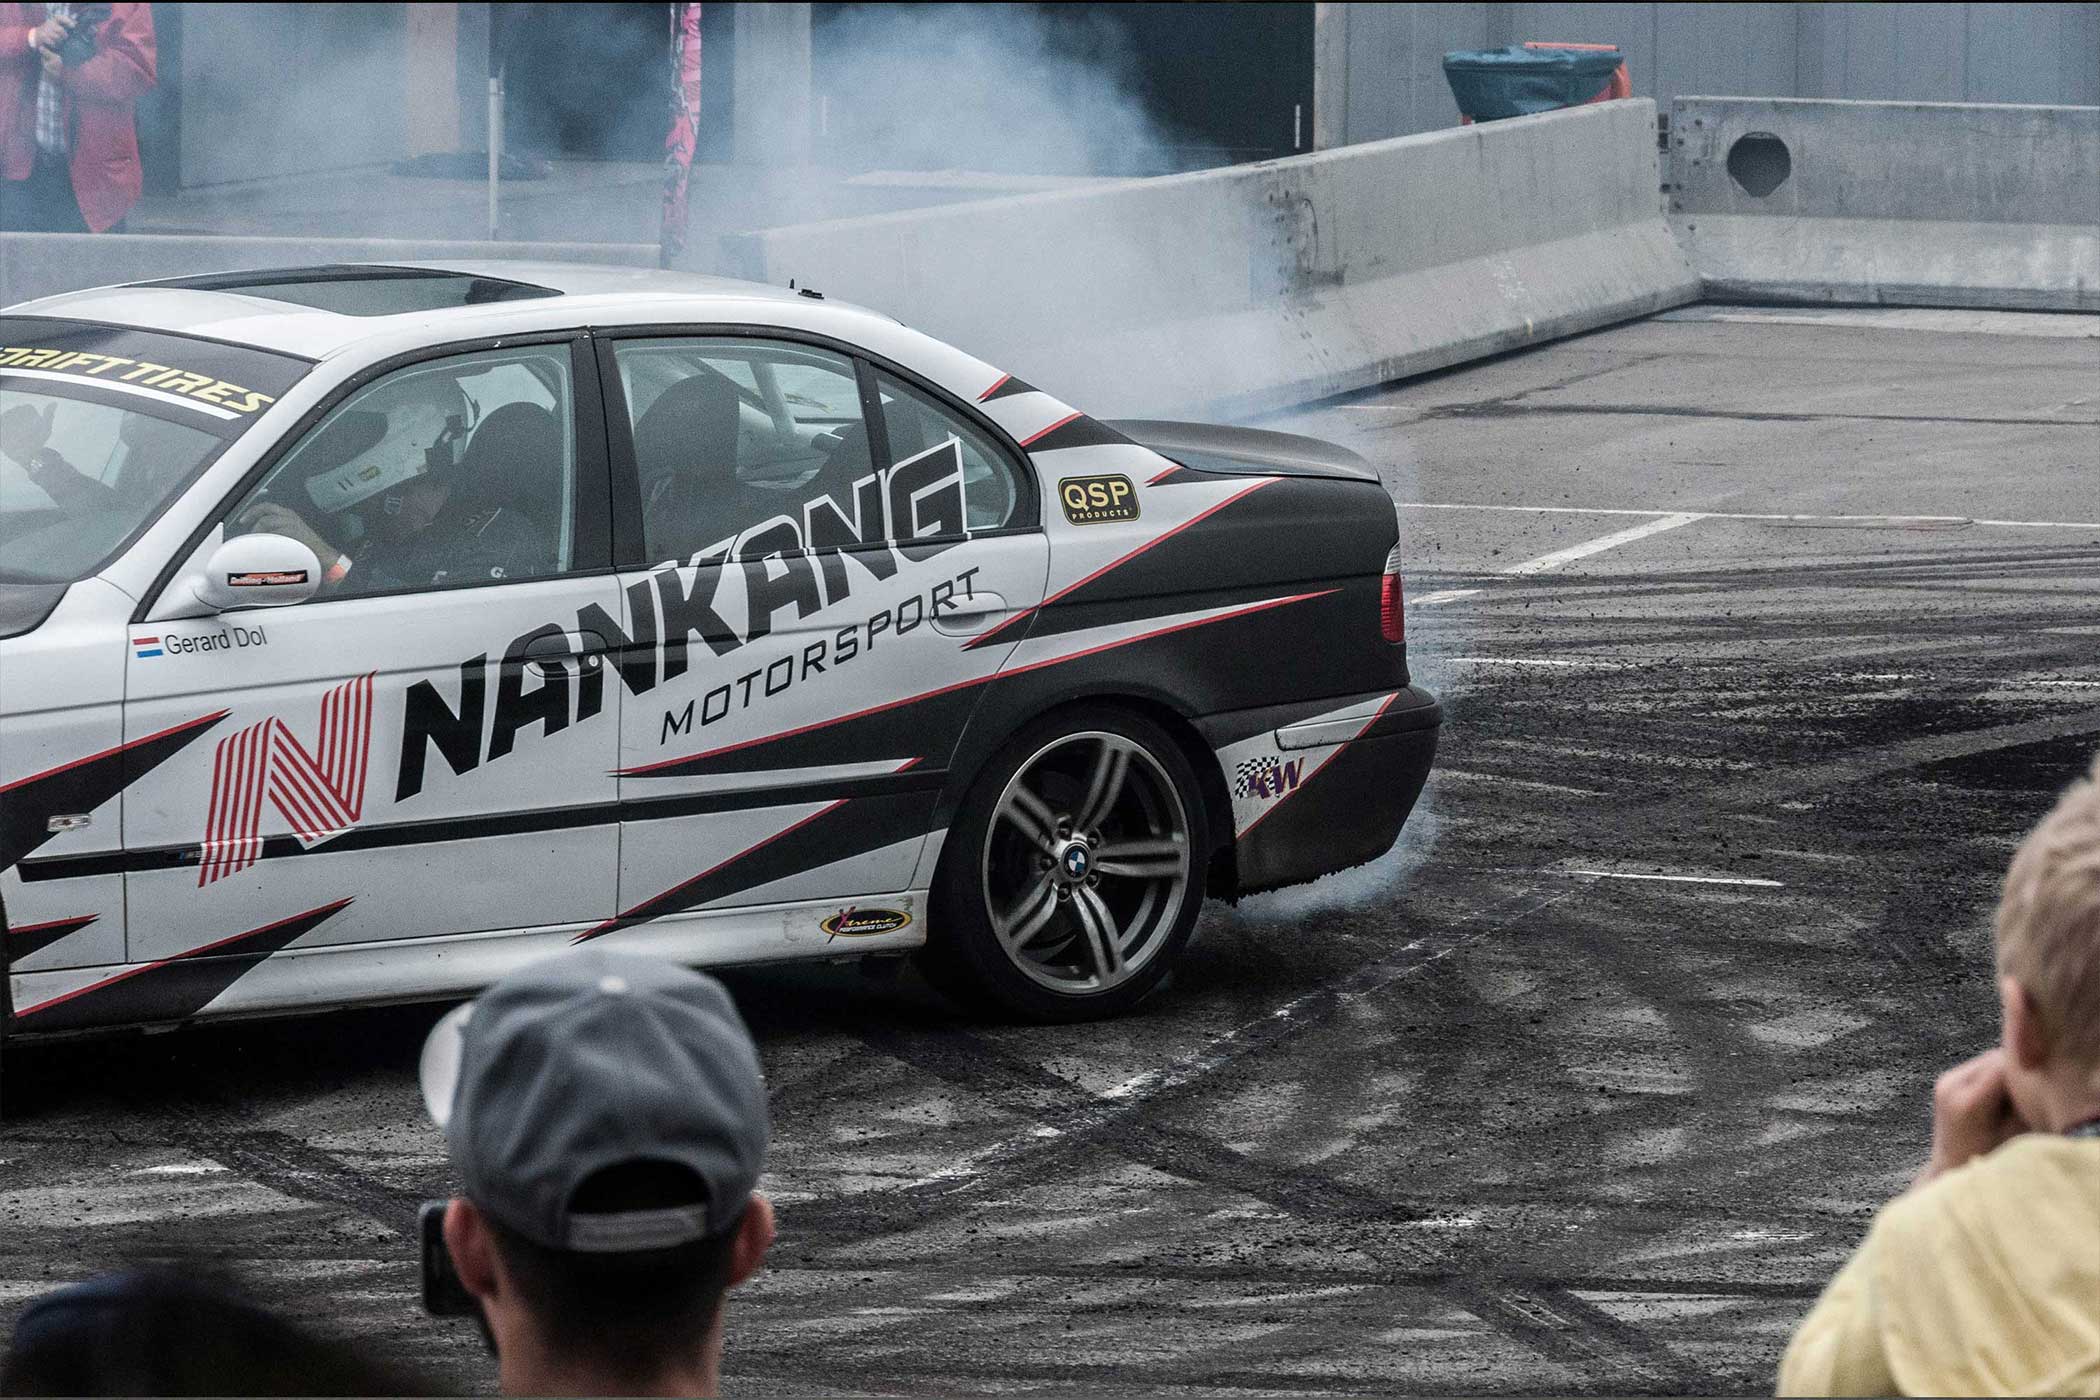 What is most popular Nissan Model in motorsport drifting competitions?